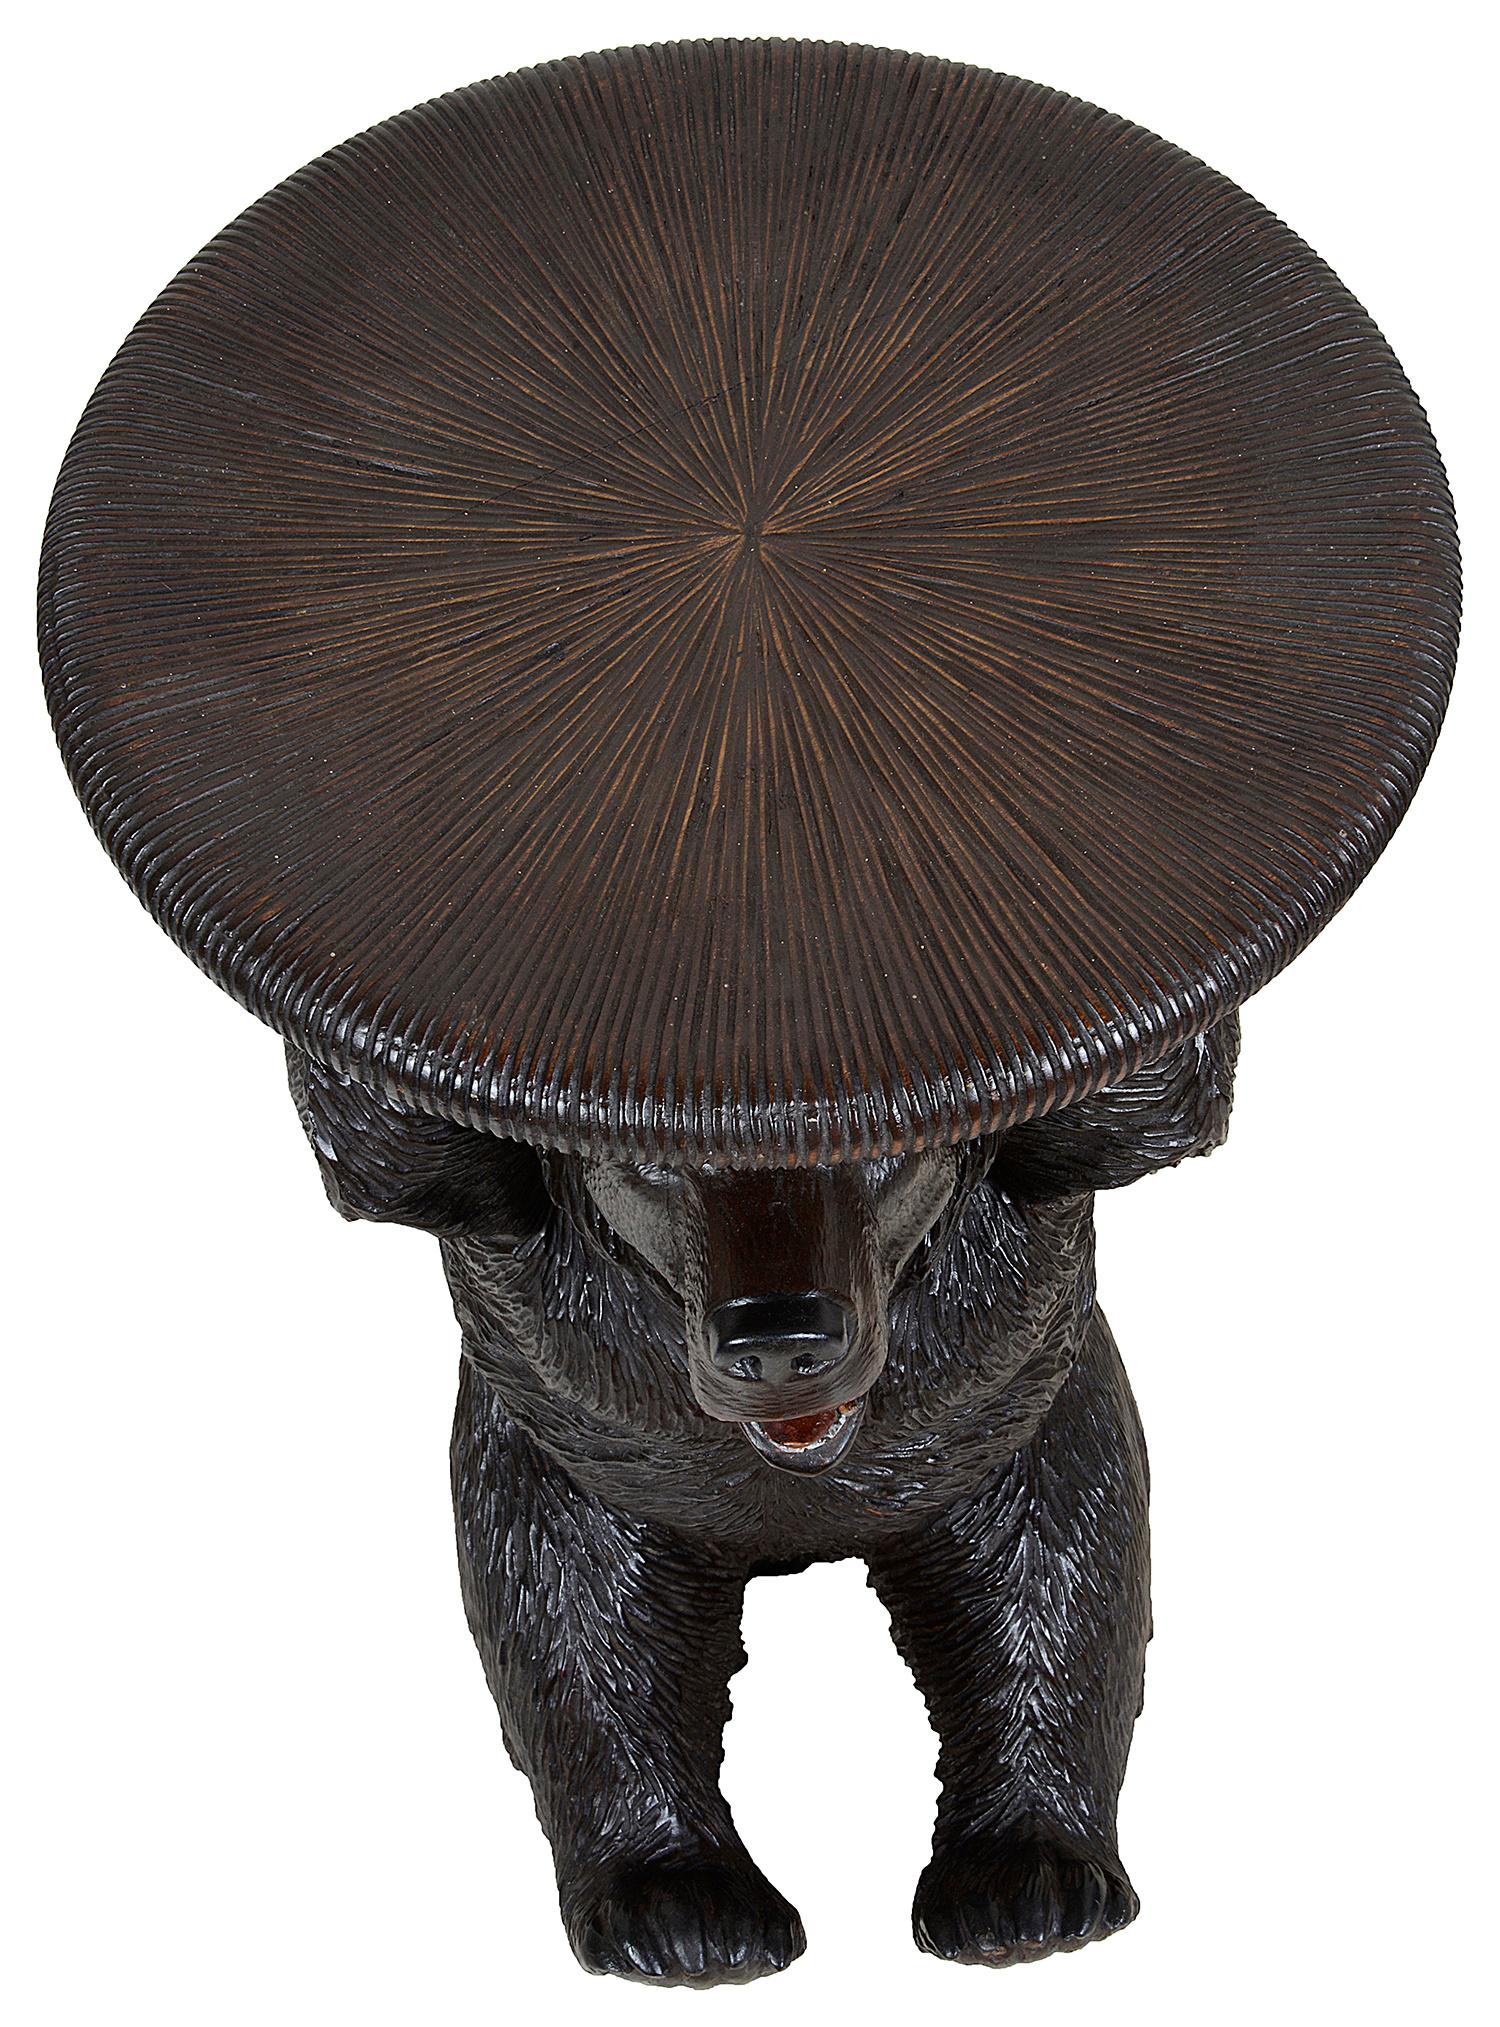 A rare pair of 19th century carved Black Forest stools, each with revolving rising seats, supported by two jovial bears holding tree branches beneath the carved wood seats.